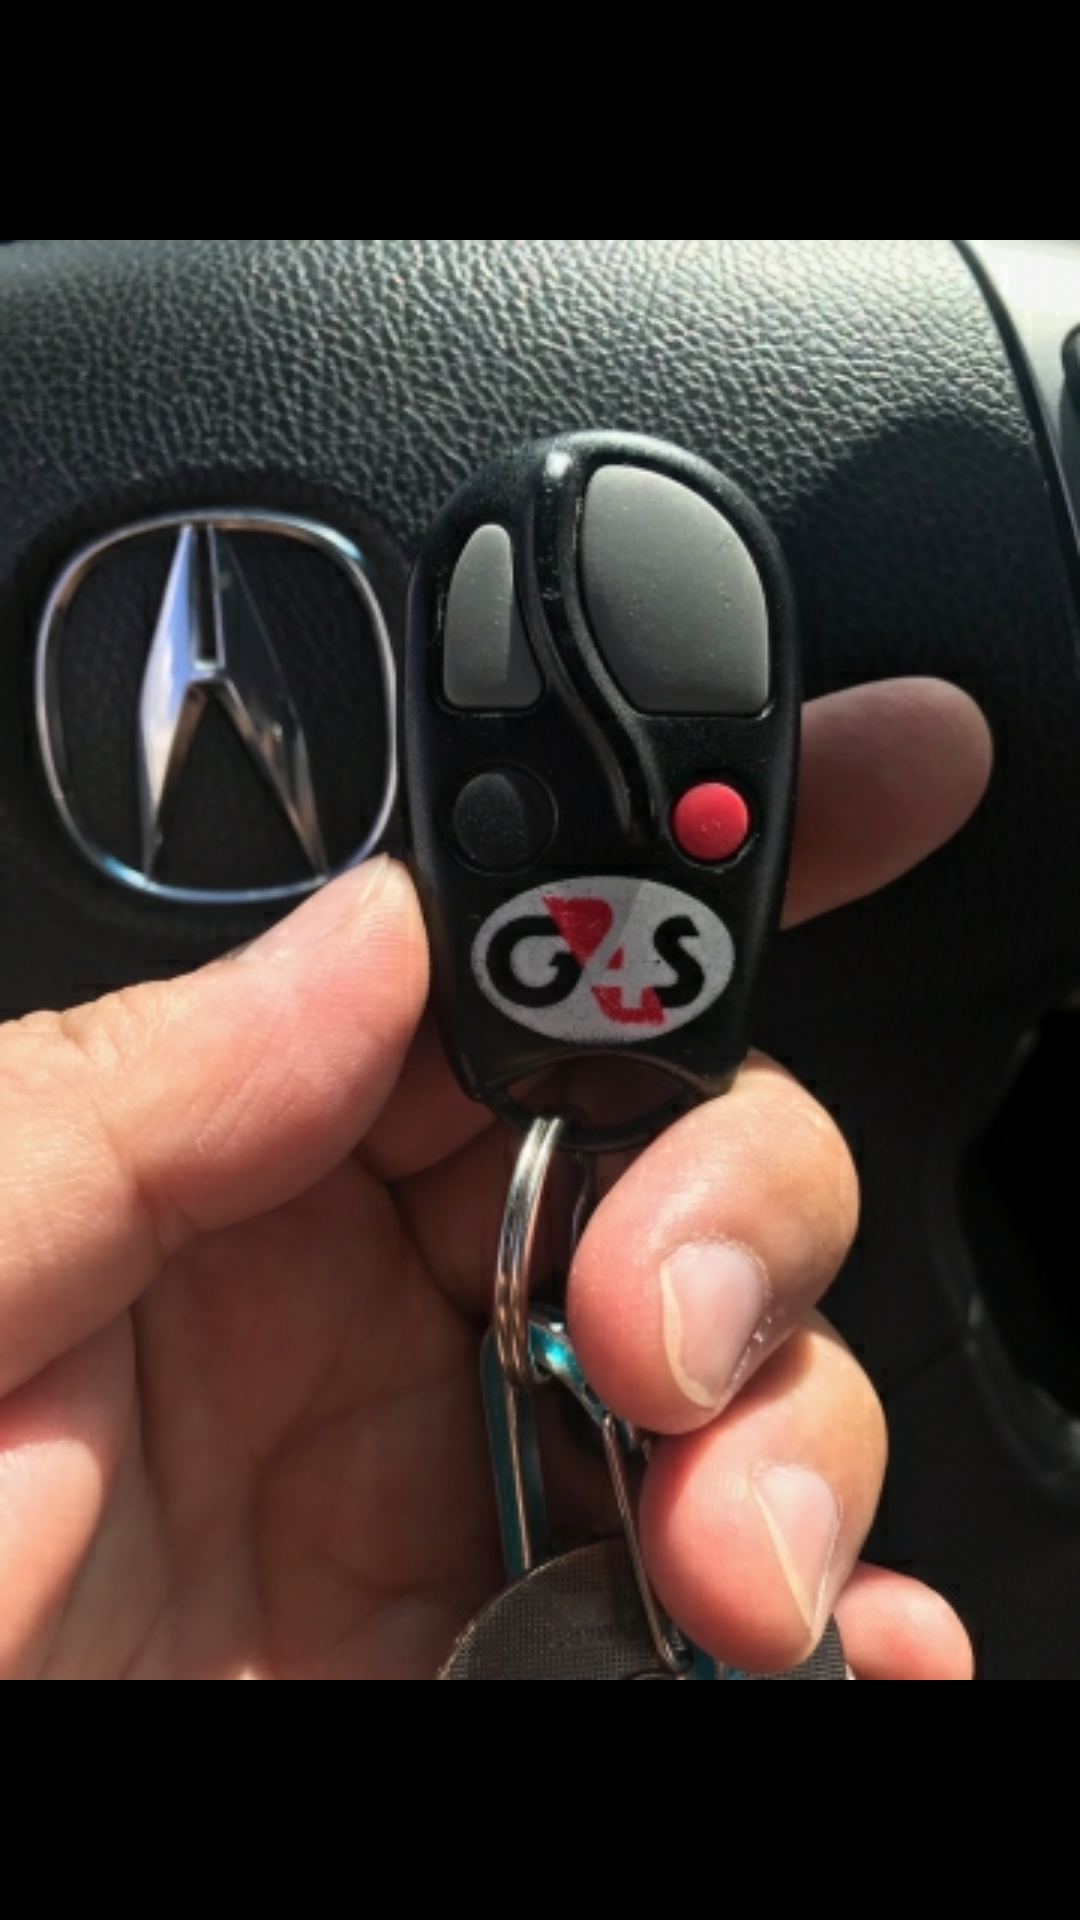 G4S security button fob hid ict all formats of key fobs plastic rfid em 410x fob key copy clone service duplicate replace replacement copying 